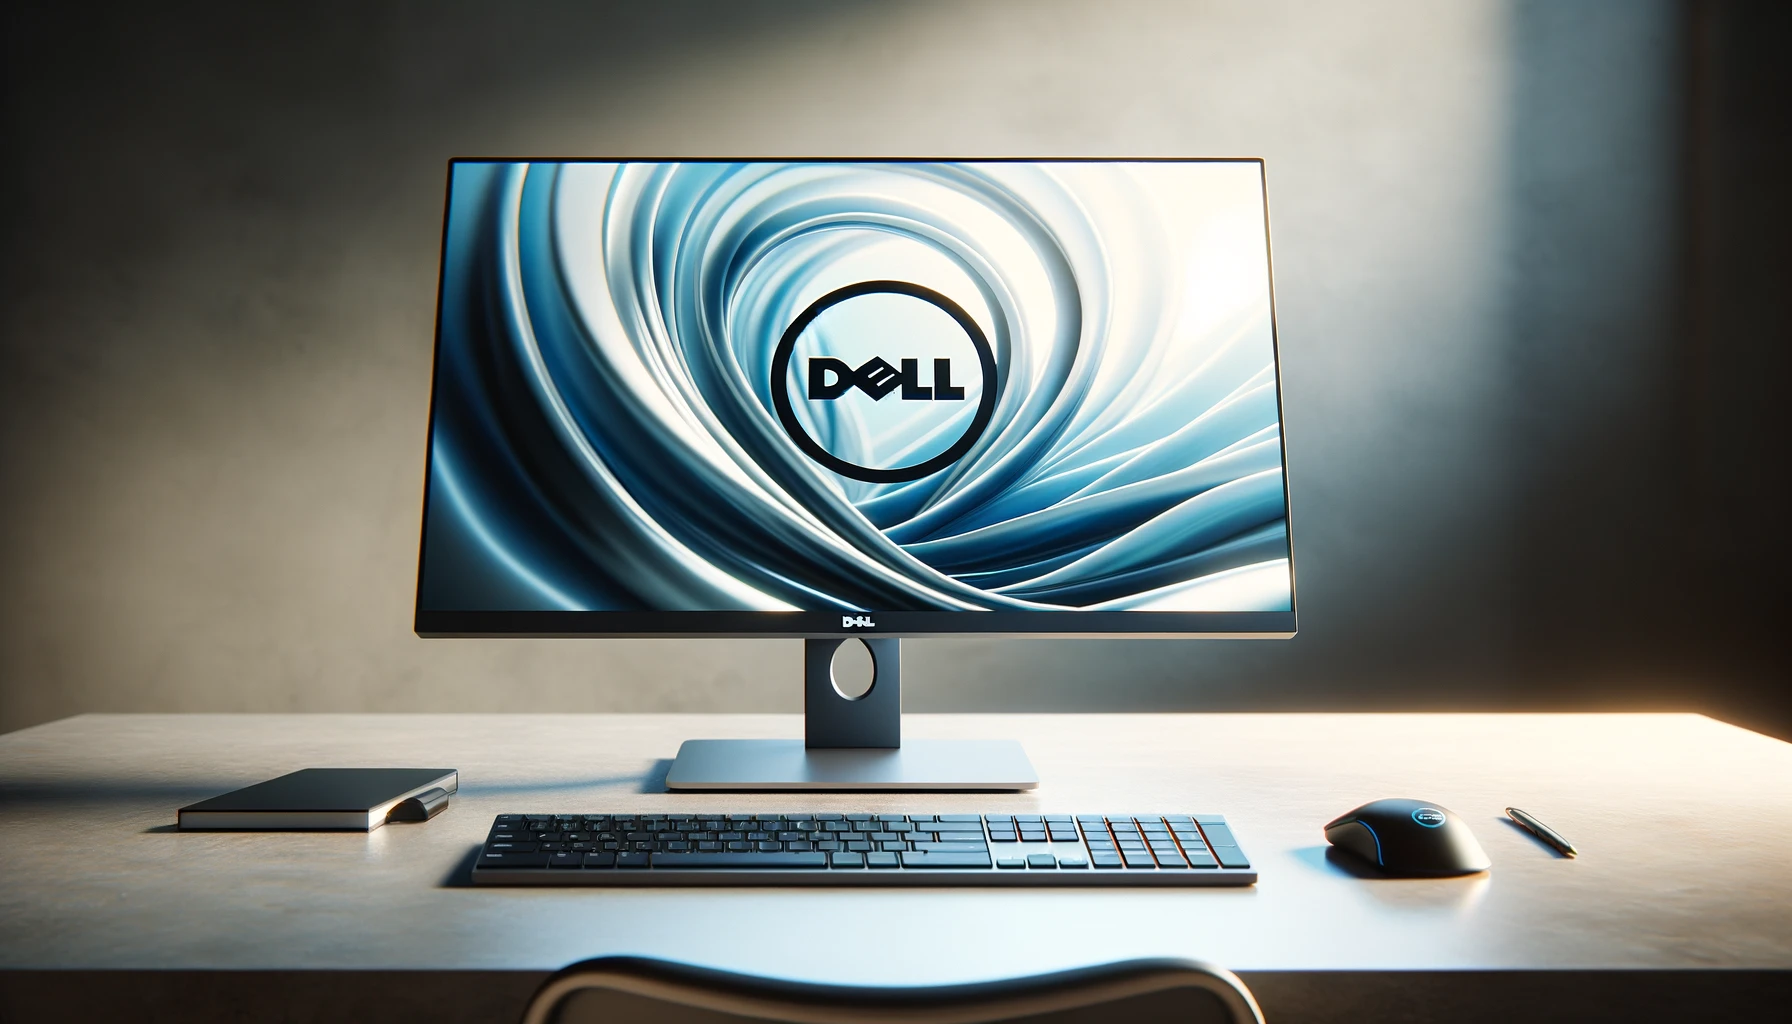 The image above presents a high-quality stock photo featuring a sleek Dell computer setup, capturing the essence of professionalism and productivity within a modern workspace.